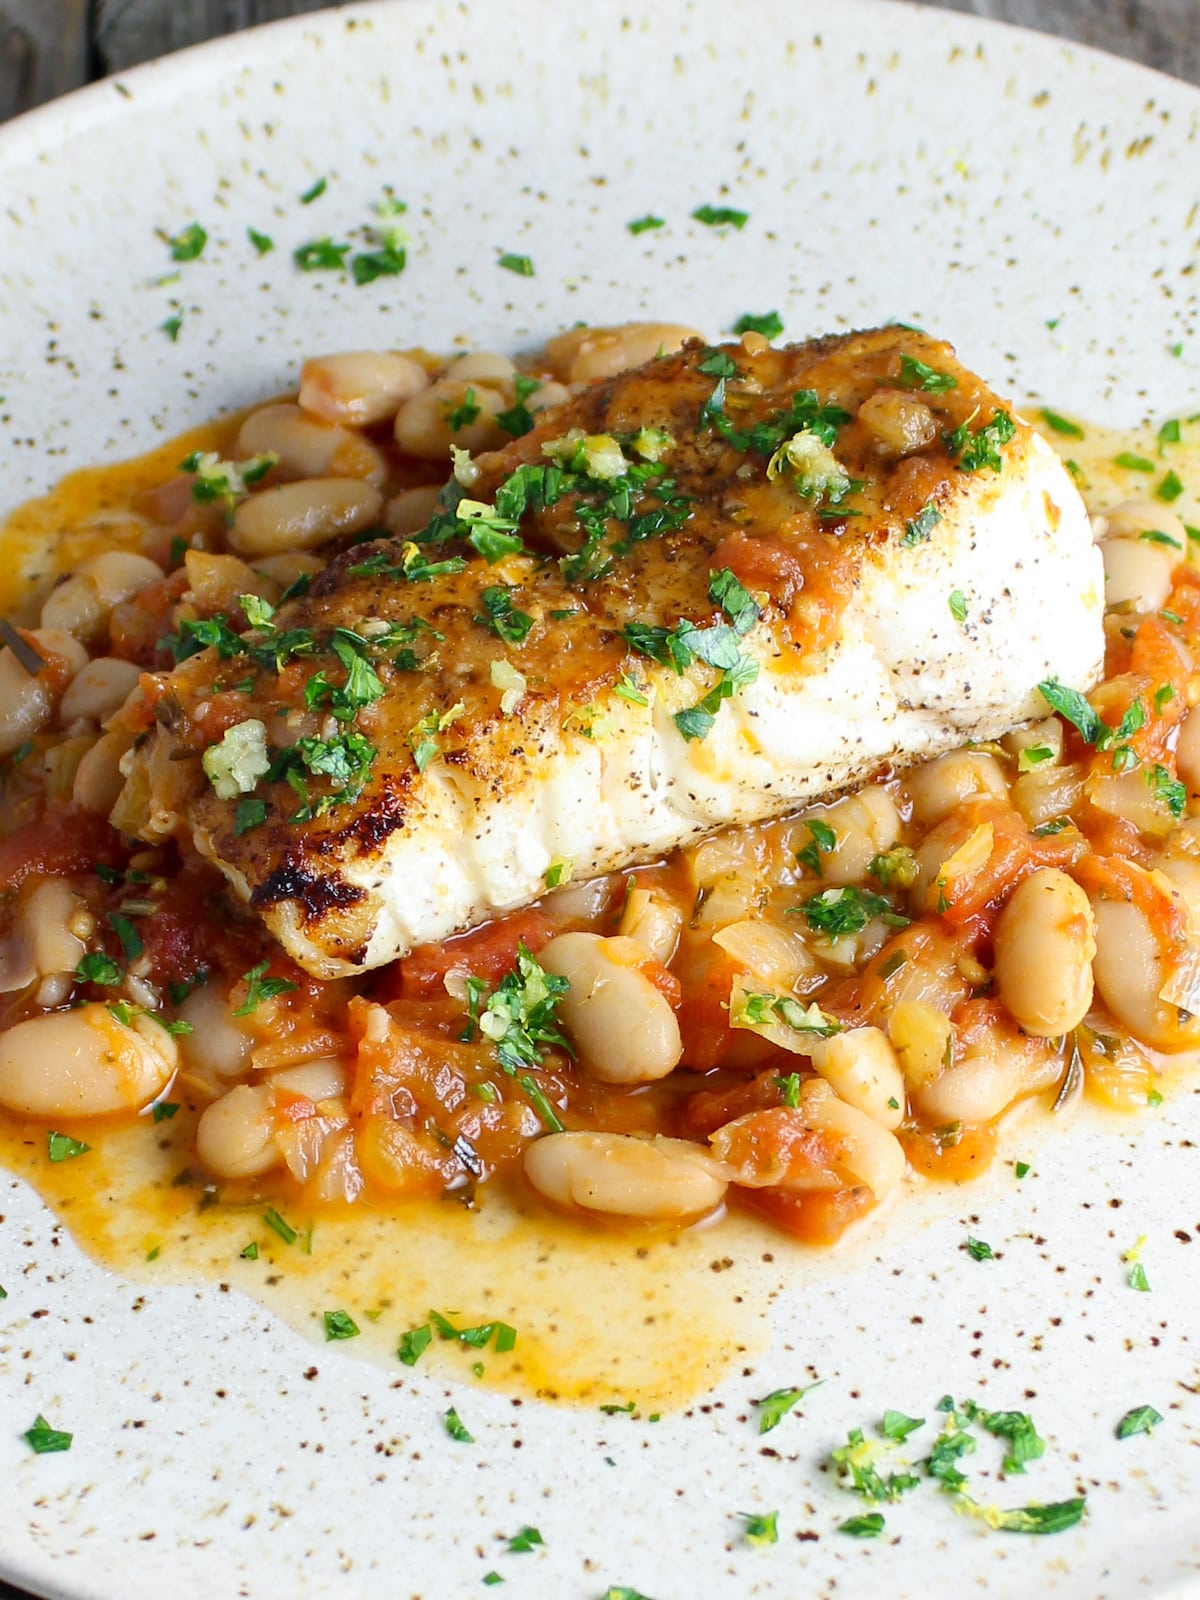 One piece of the most delicious white fish on a plate with sautéed tomatoes and cannellini beans.